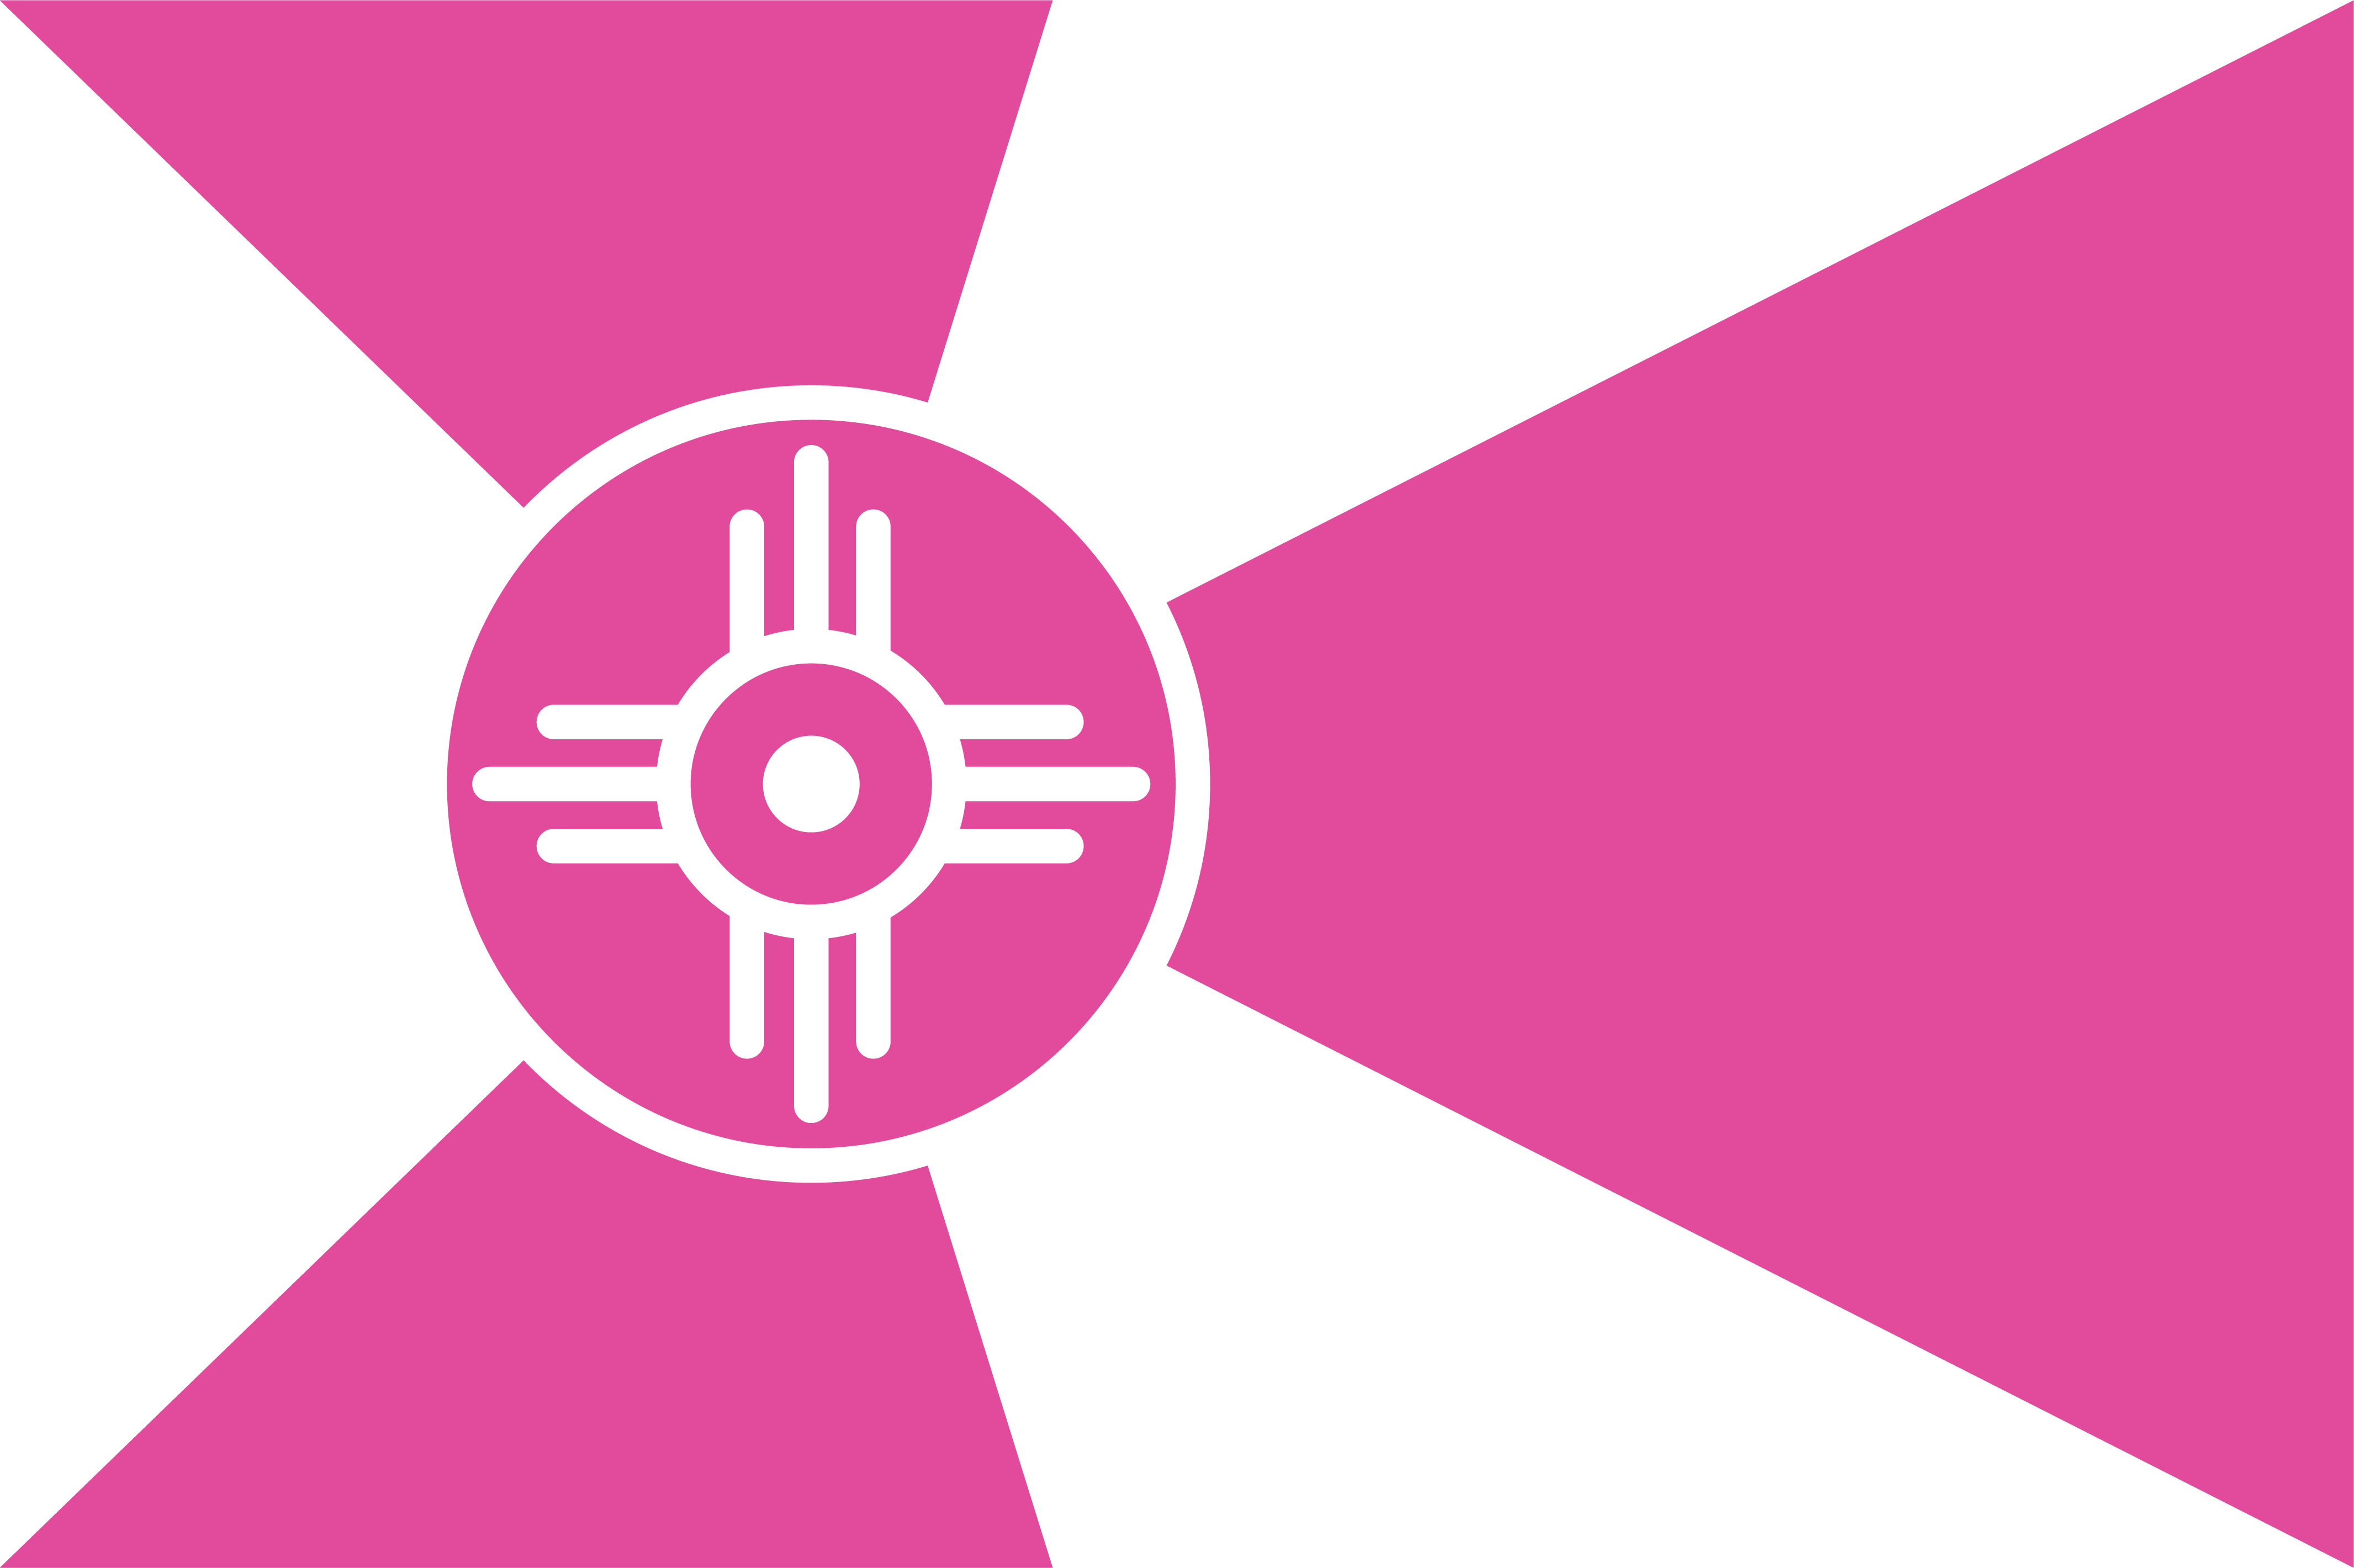 Wichita, KS city flag decorated with the Urban Cool ICT pink brand color